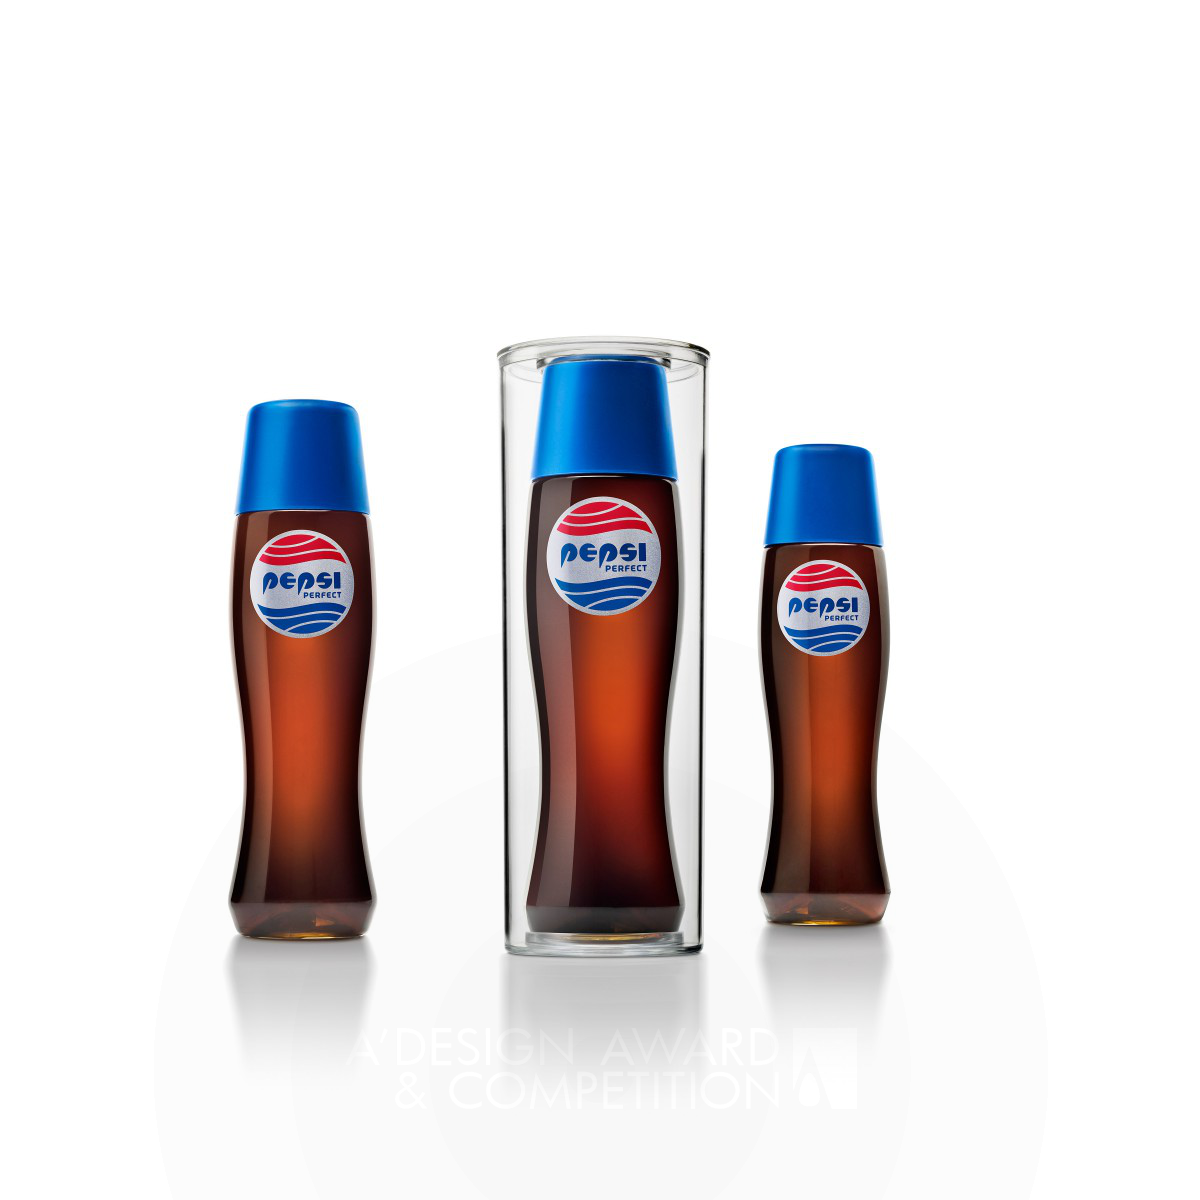 Pepsi Perfect <b>Limited Edition Beverage Bottle